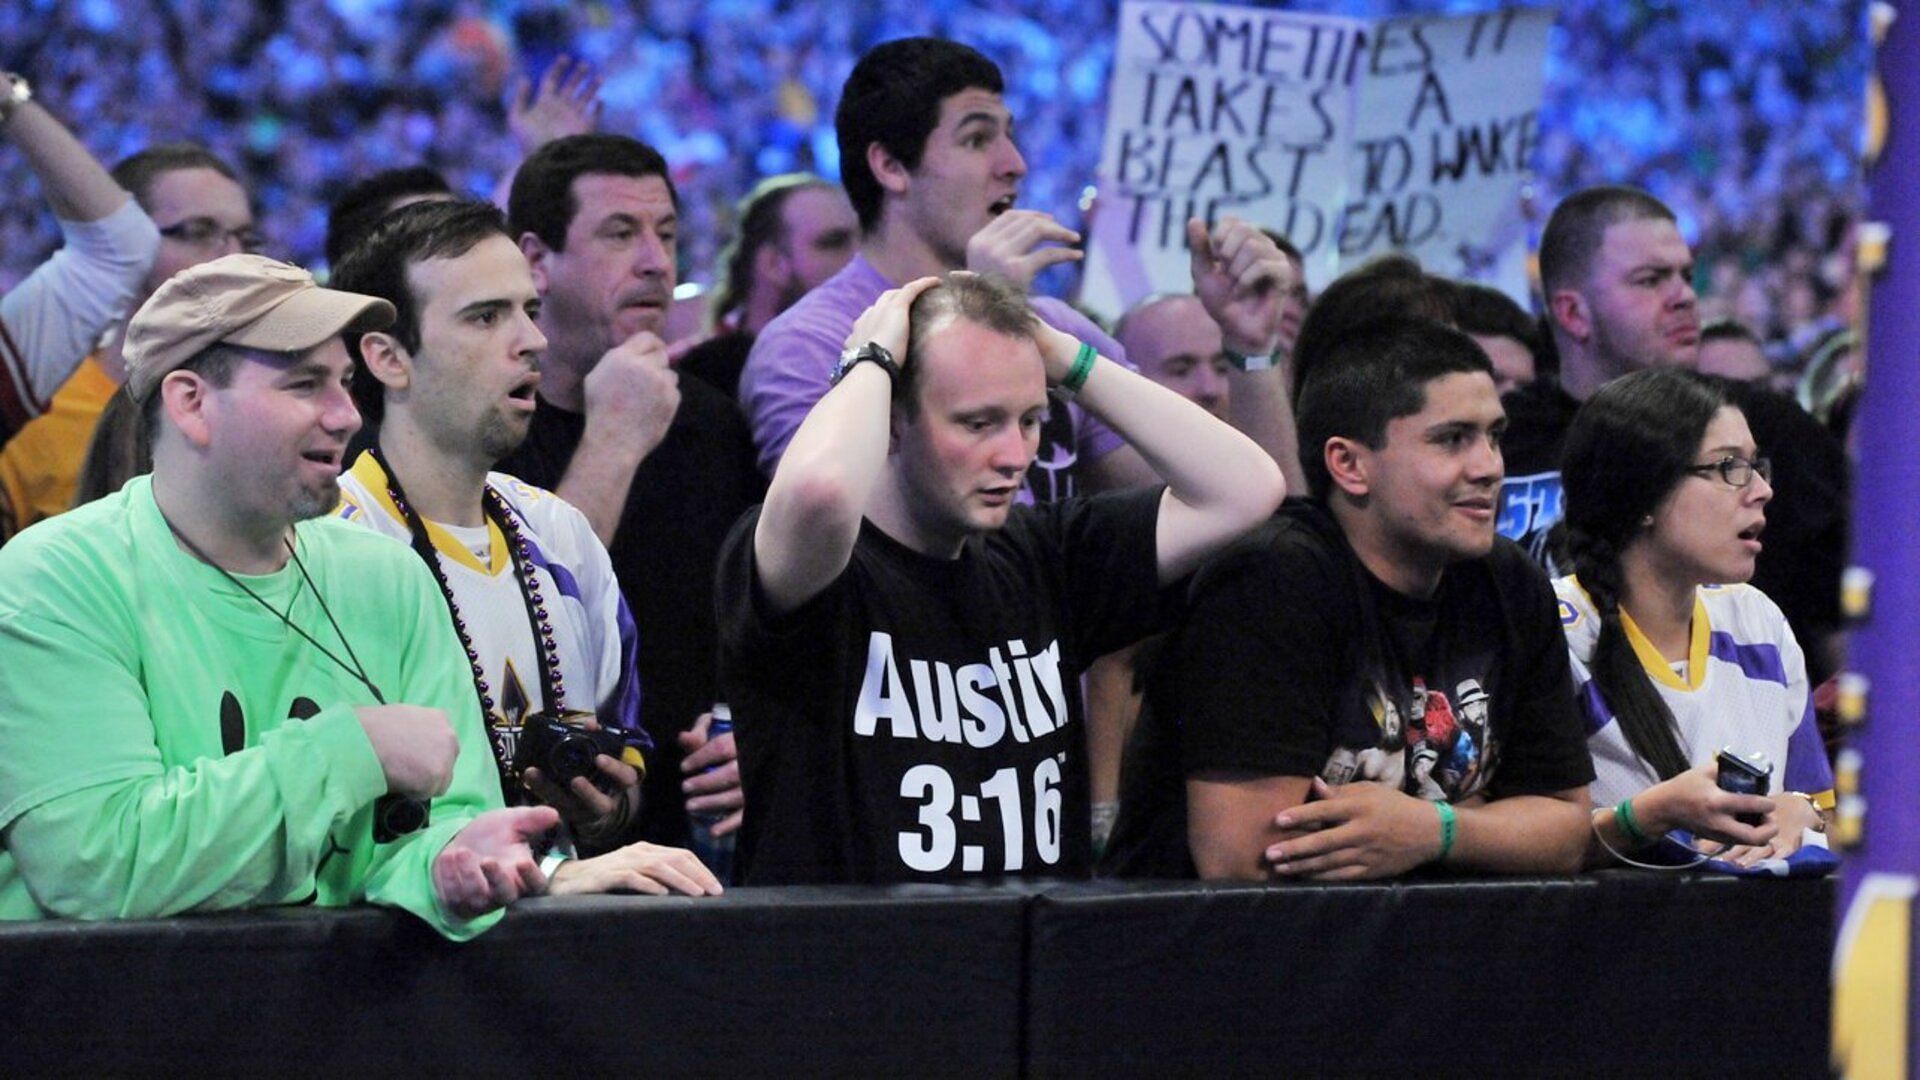 Shocked WWE fans react to a major WrestleMania moment